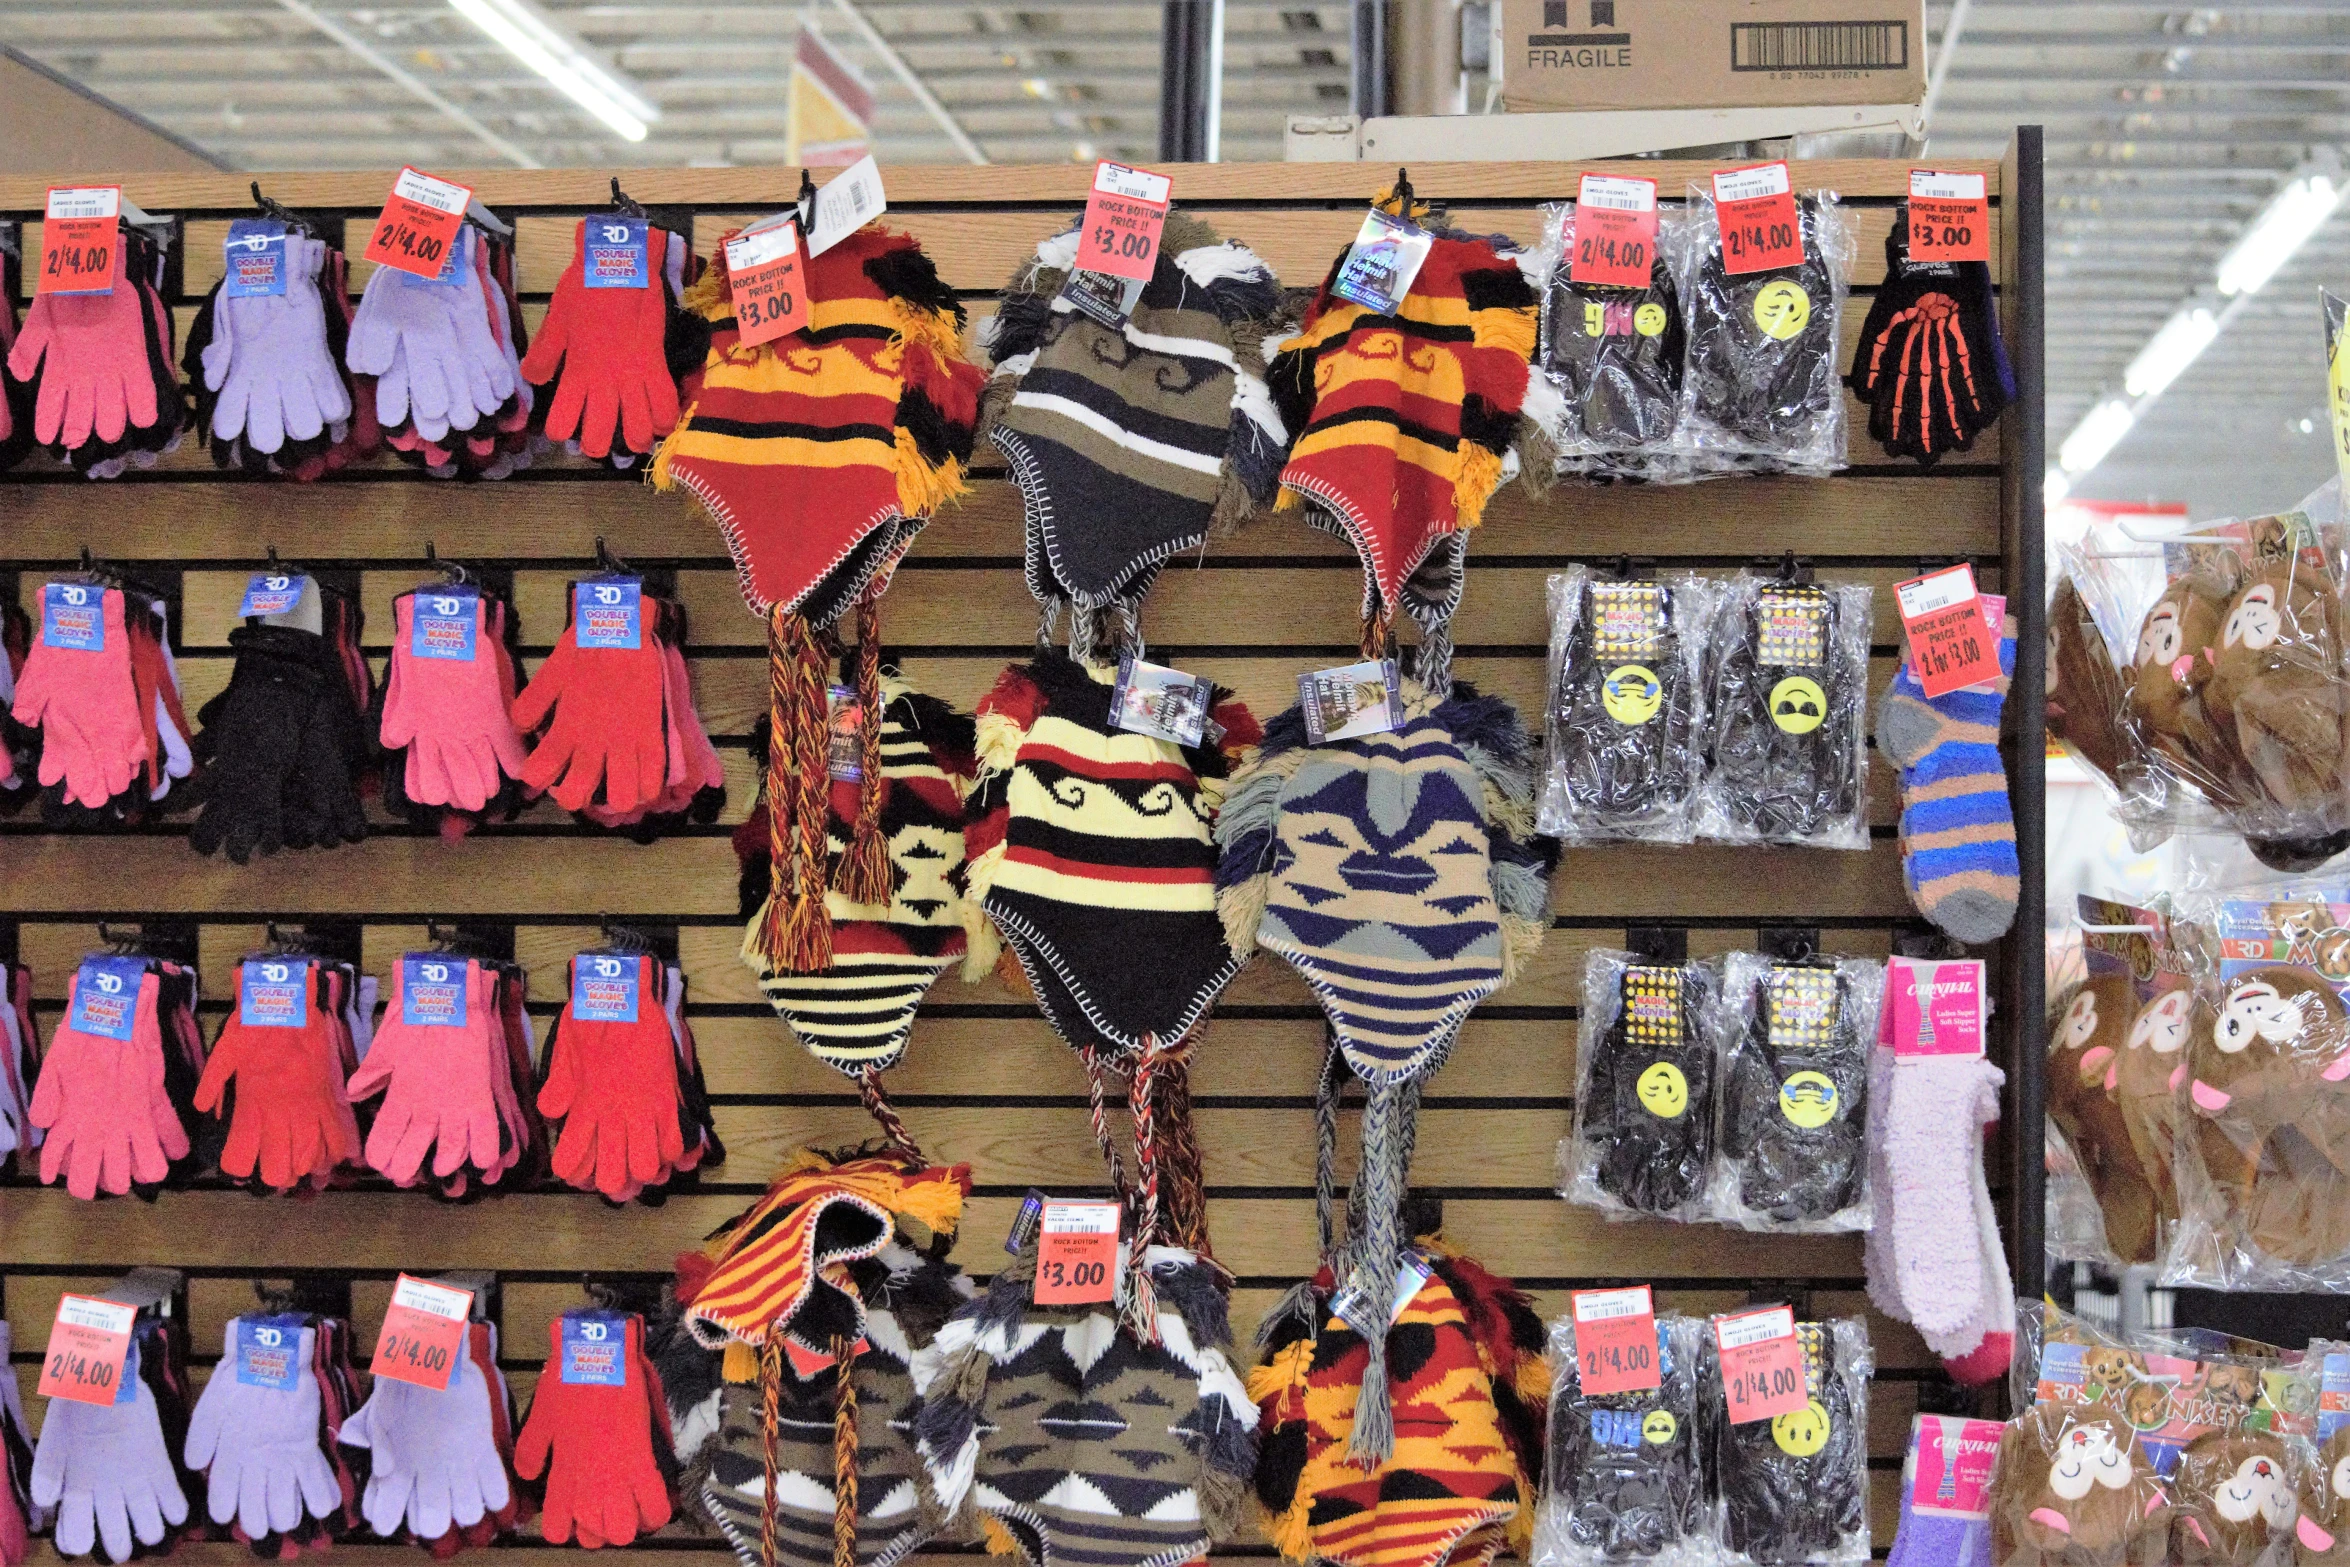 several different styles and colors of clothing displayed on shelves